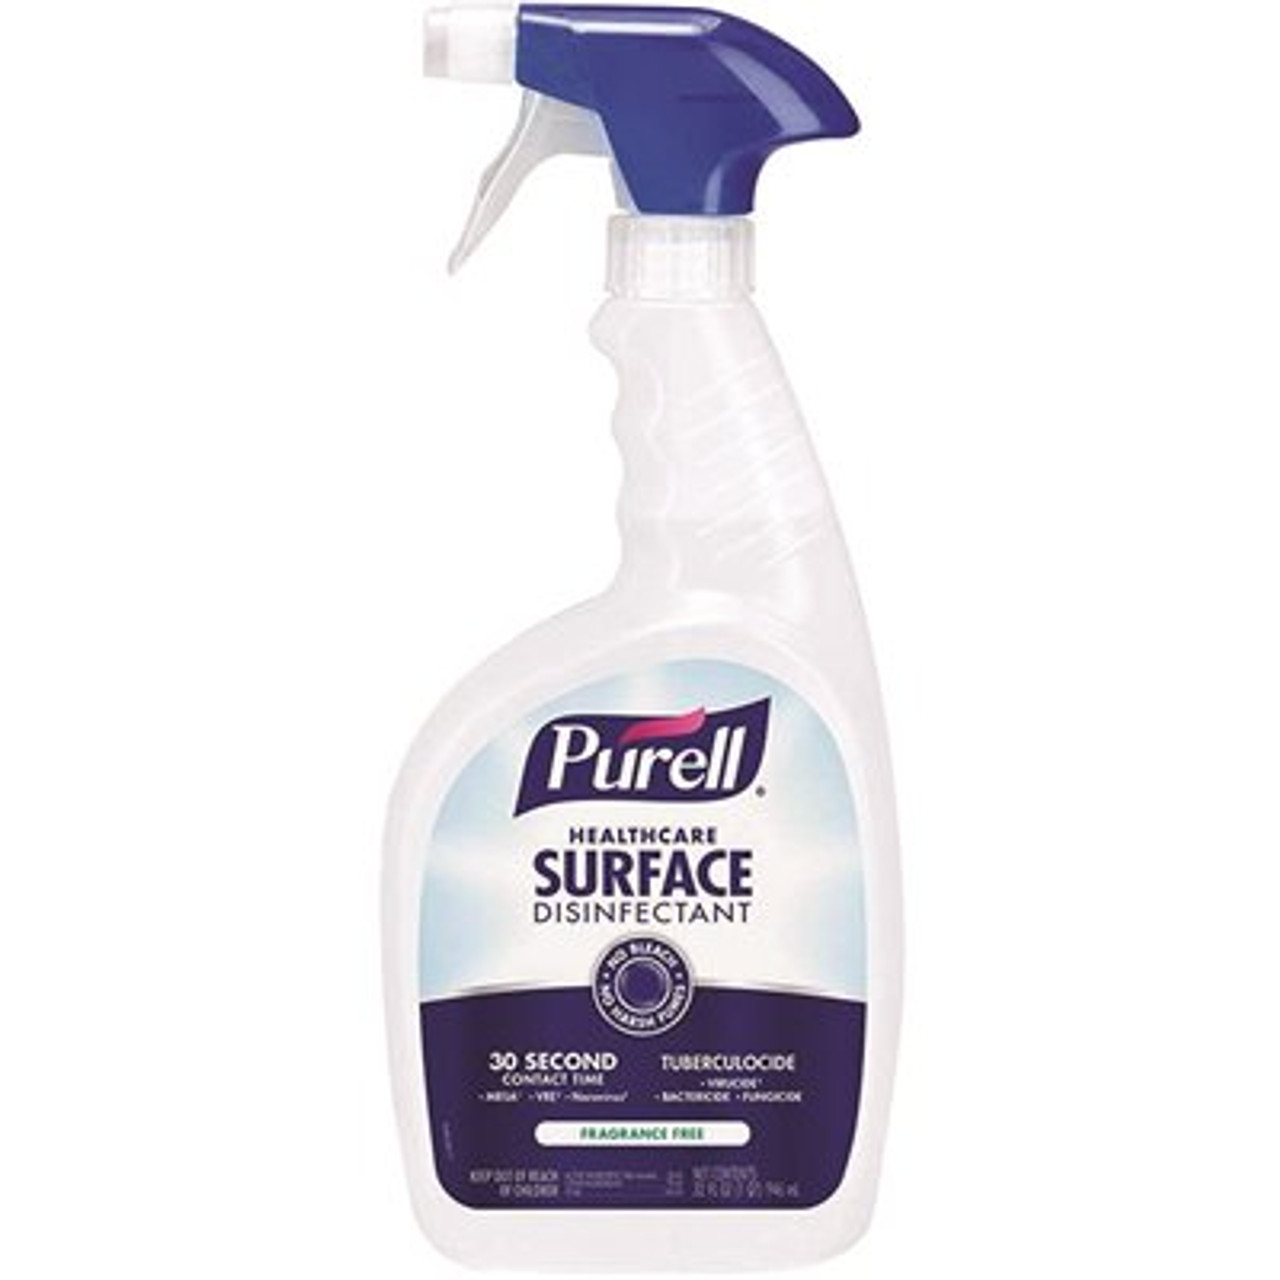 PURELL Healthcare Surface Disinfectant Spray, Fragrance Free, 32 fl. oz. Capped Bottle with Spray Trigger (Pack of 6 Per